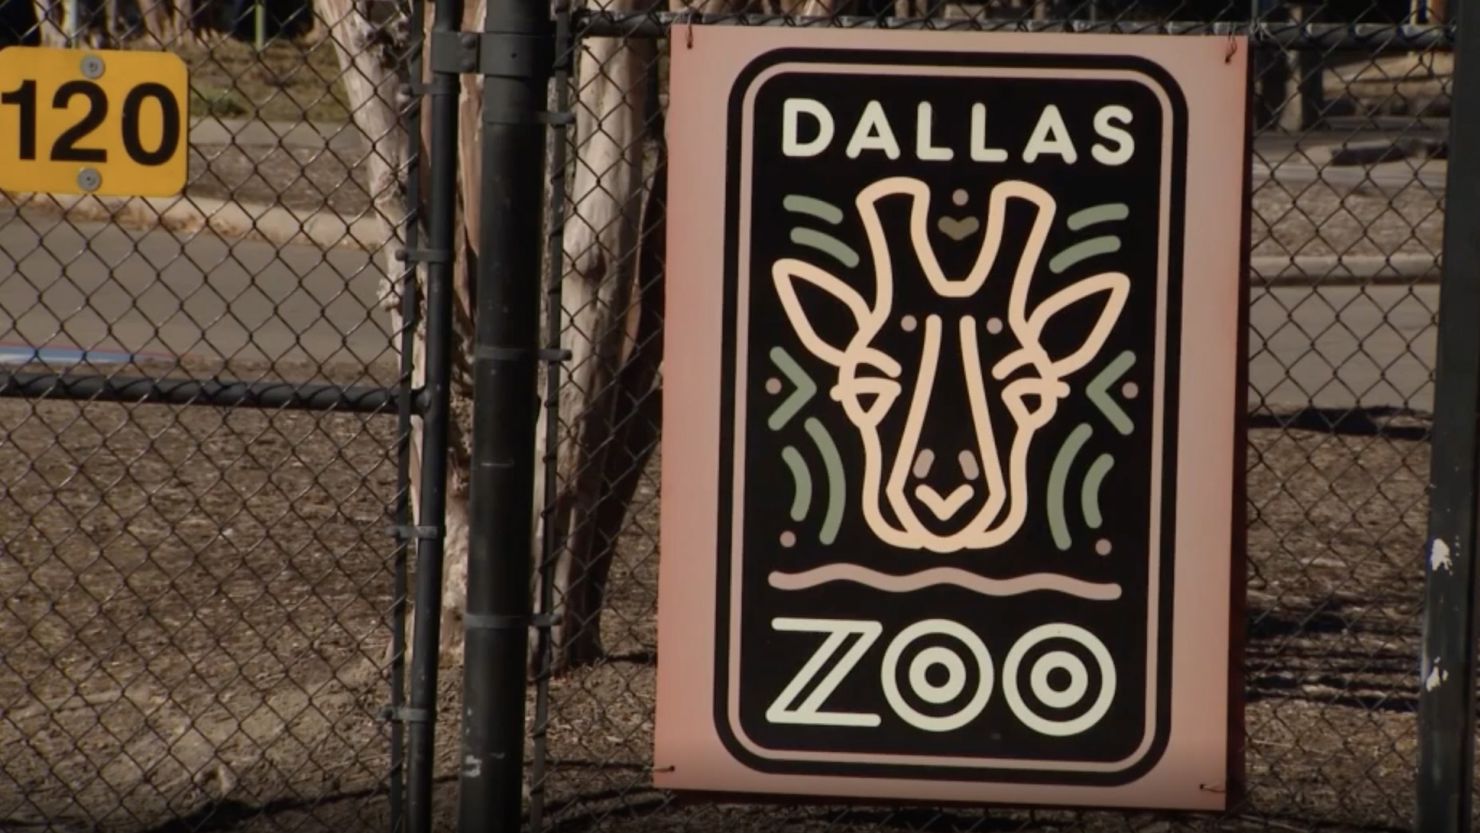 Several incidents at the Dallas Zoo in recent weeks have officials concerned.